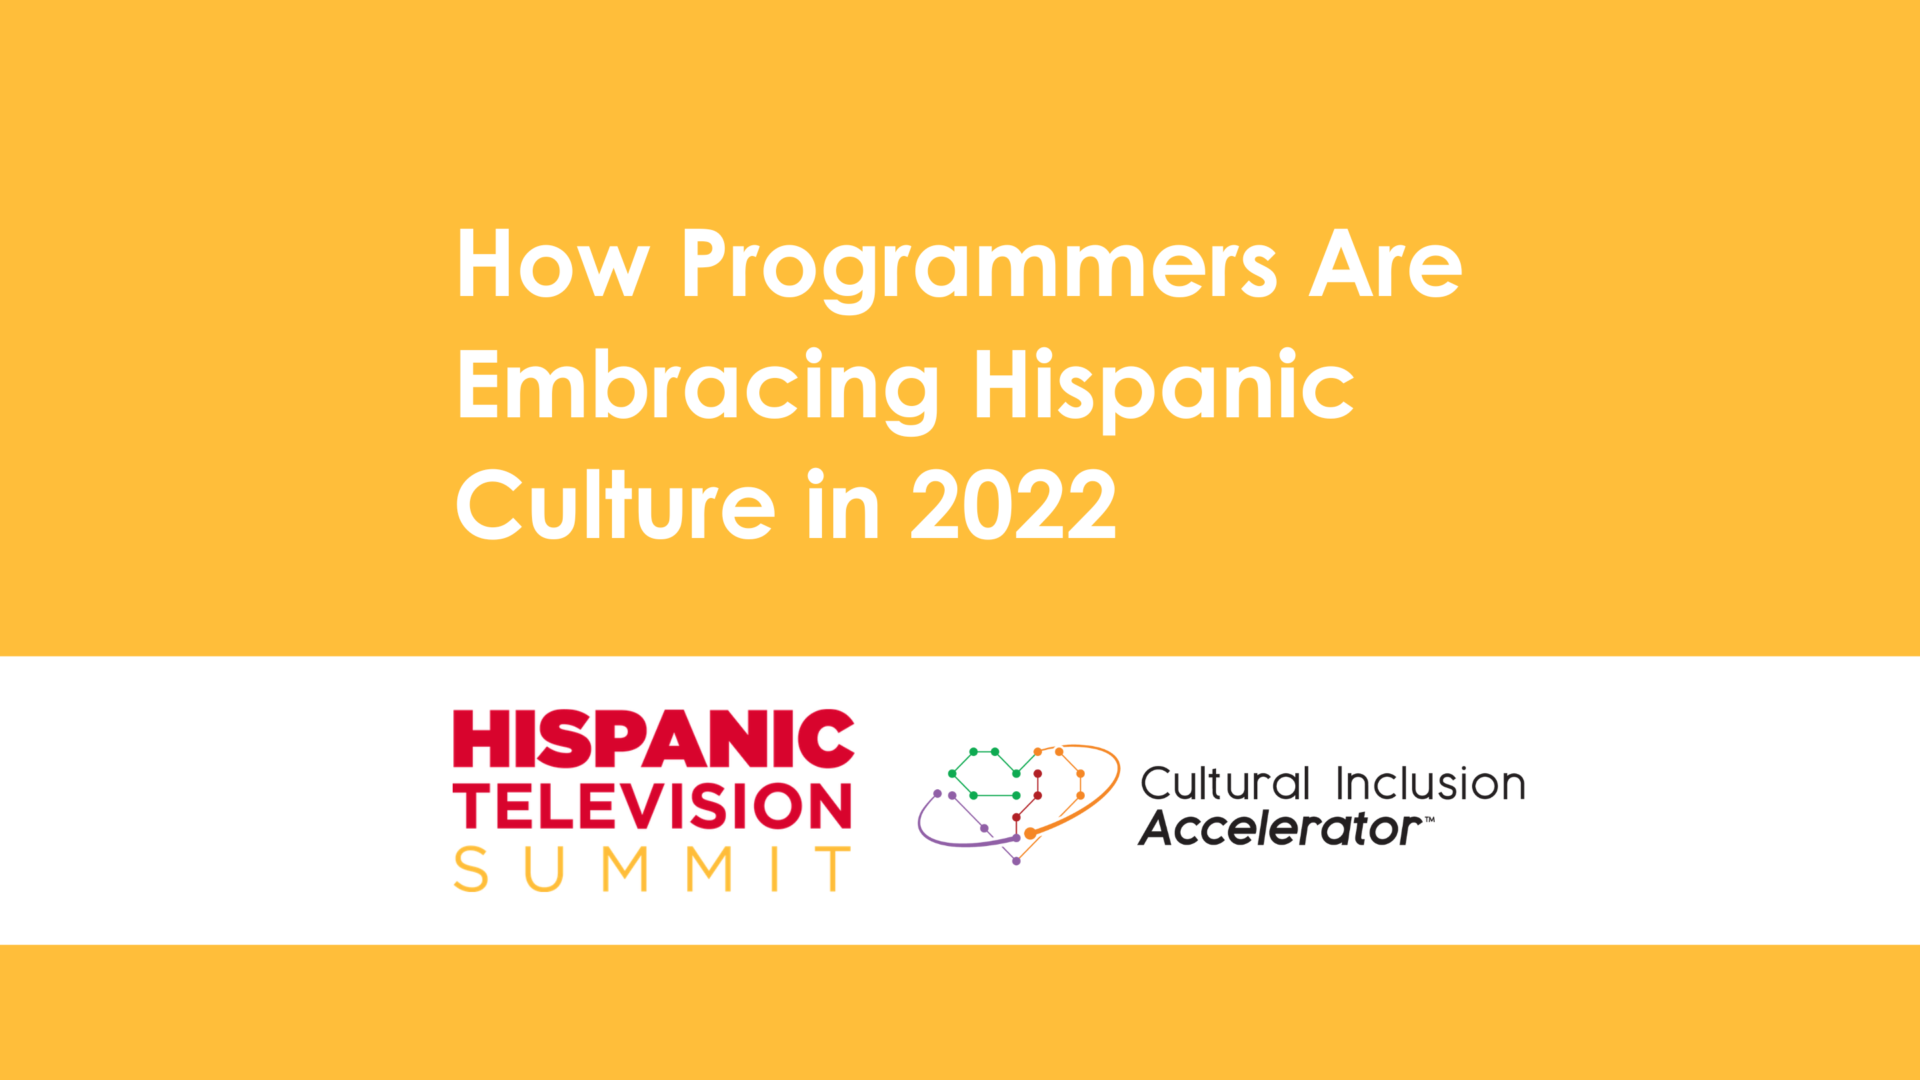 How Programmers Are Embracing Hispanic Culture in 2022 - Hispanic Television Summit